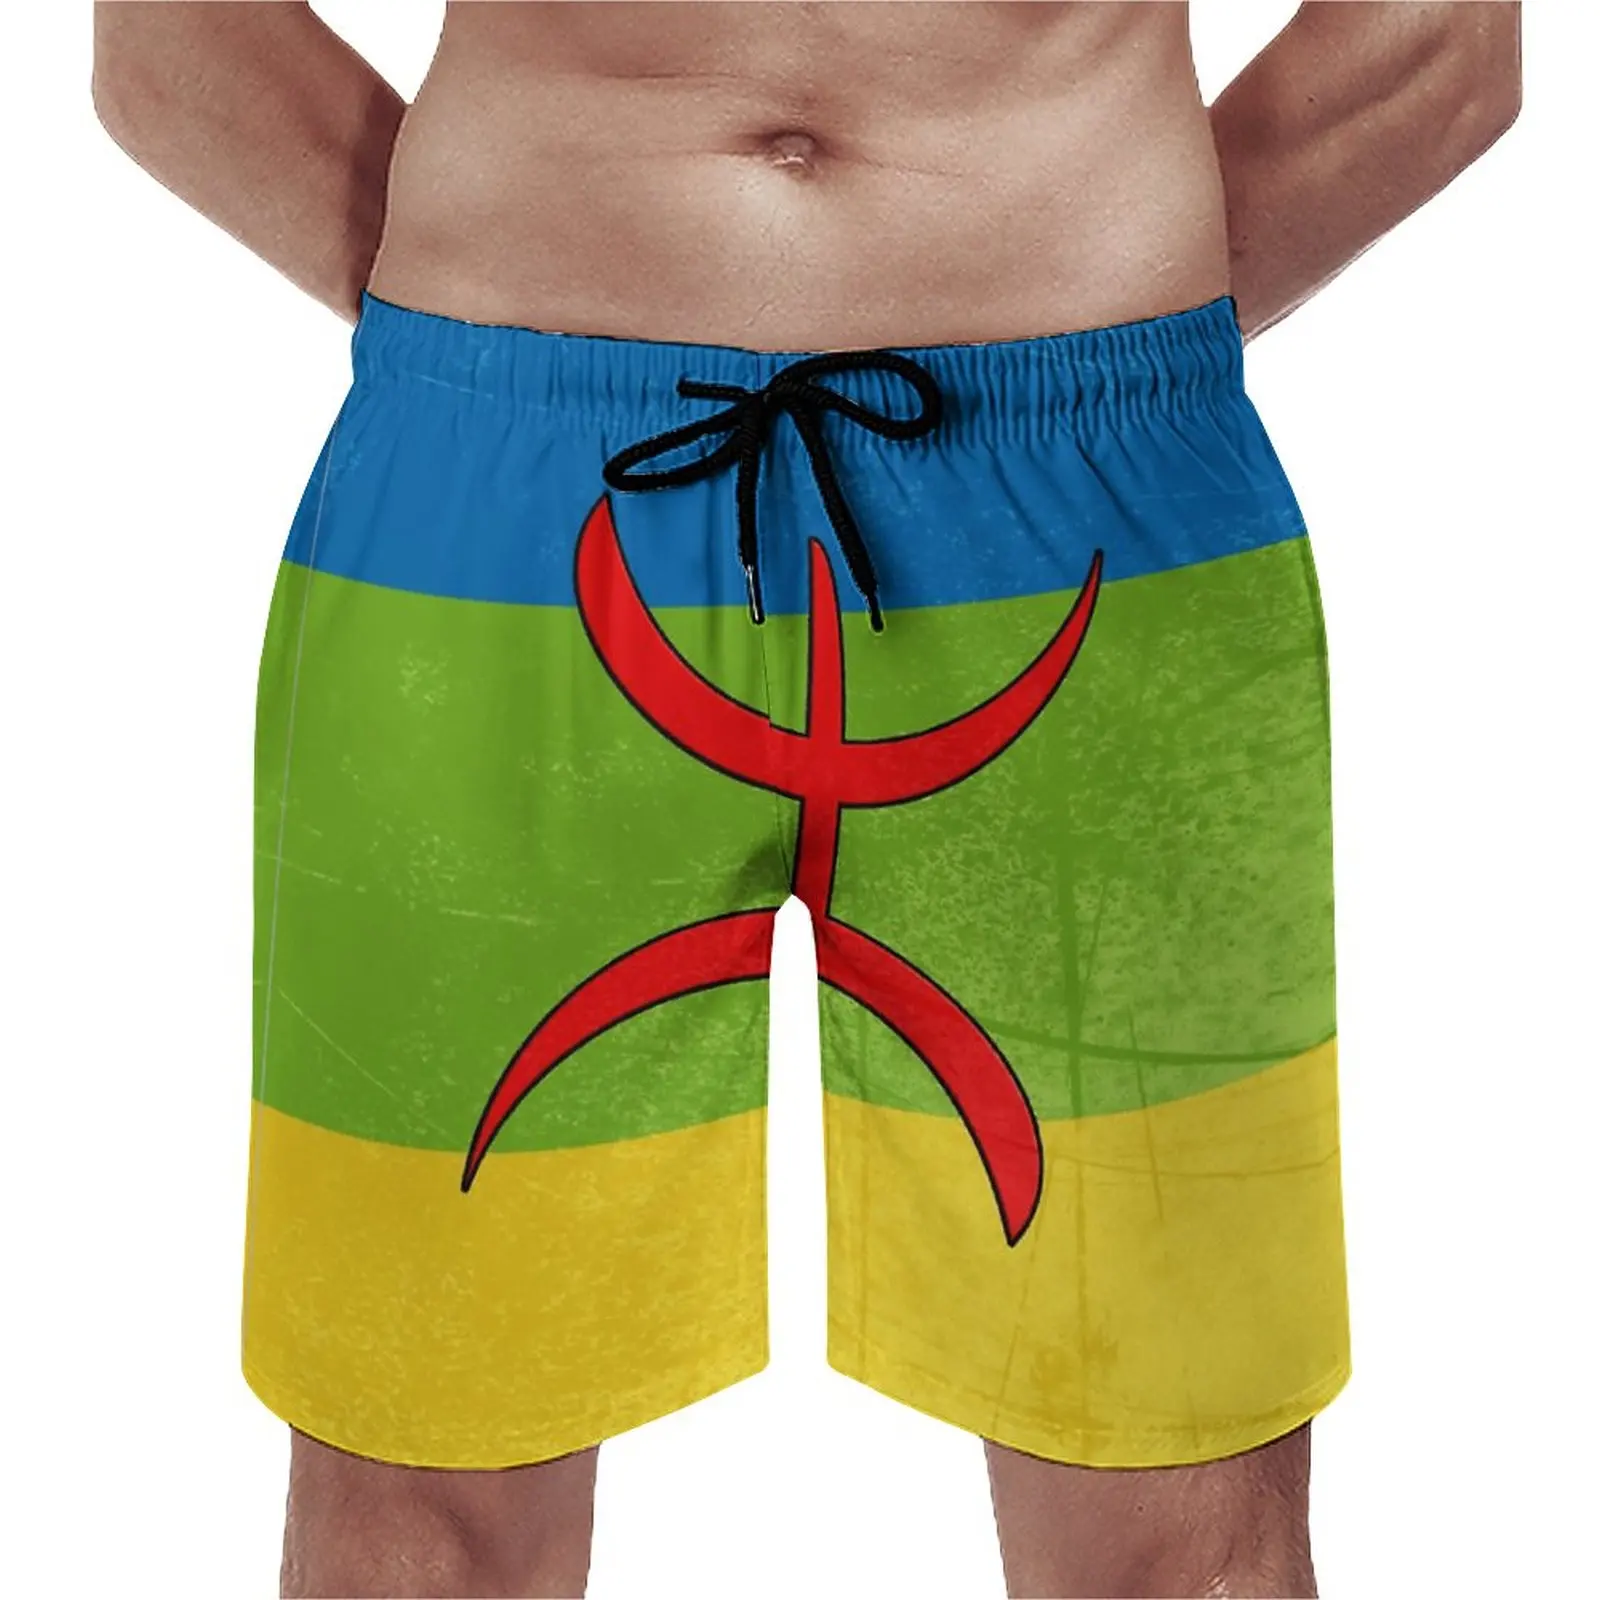 

Amazigh Flag - Berber Flag43913637 Beach Shorts Causal Breathable Quick Dry Exceptional Summertime Arbitrary Adjustable Drawcord